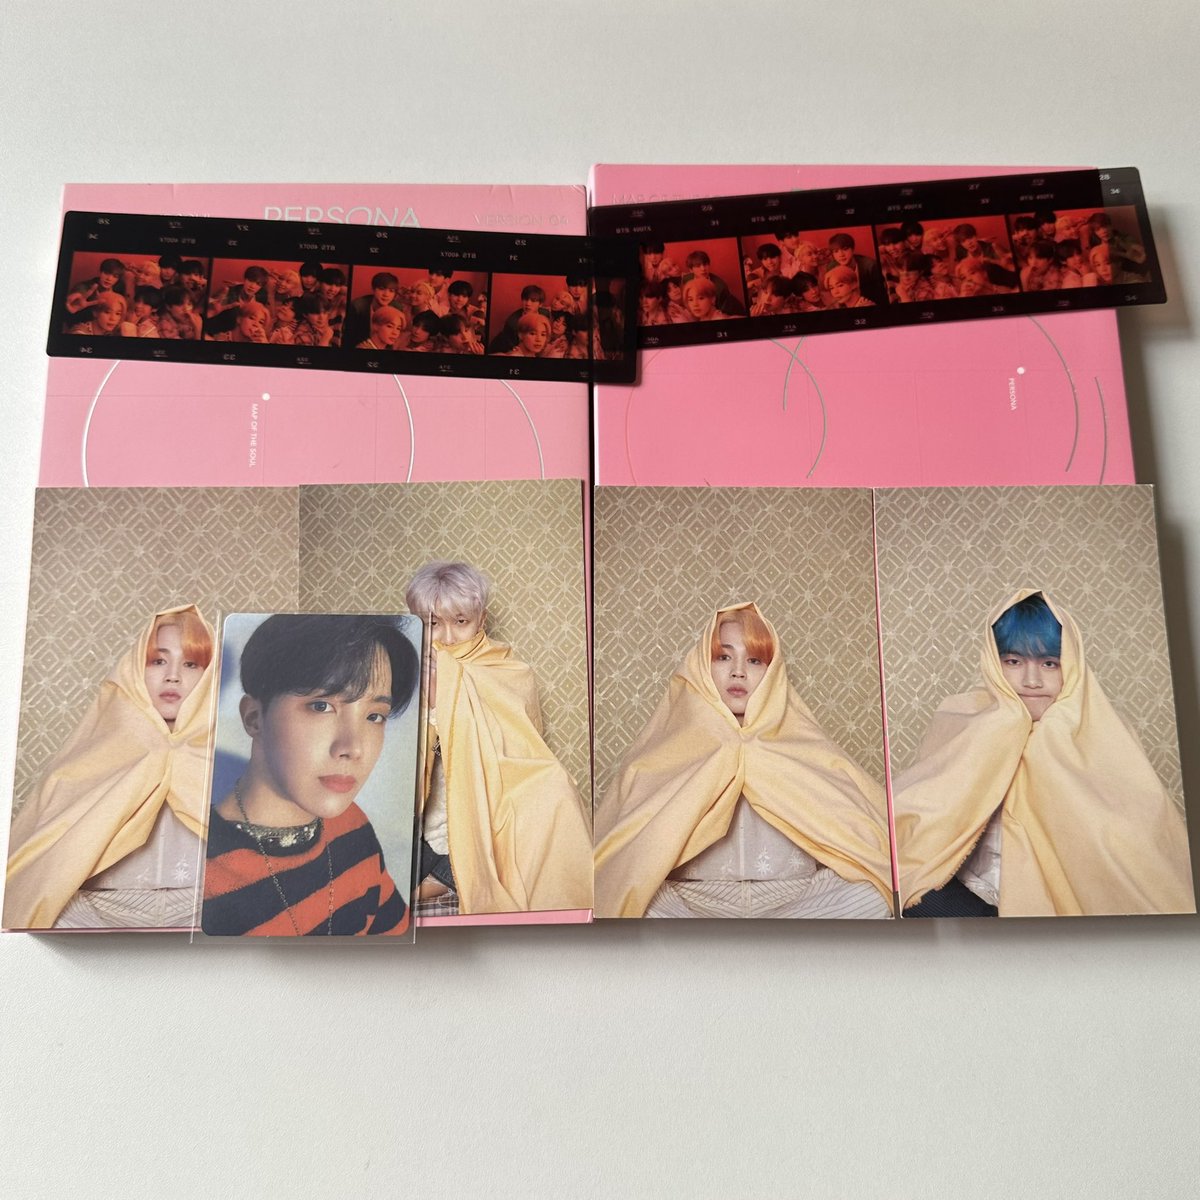 wts bts album and pc pls qyop your price feel free to dm me🥰 still can nego postage：8wm/12em #pasarBts #pasarBTSMY #pasarBTS @pasarBTS pls help rt tqsm🥰